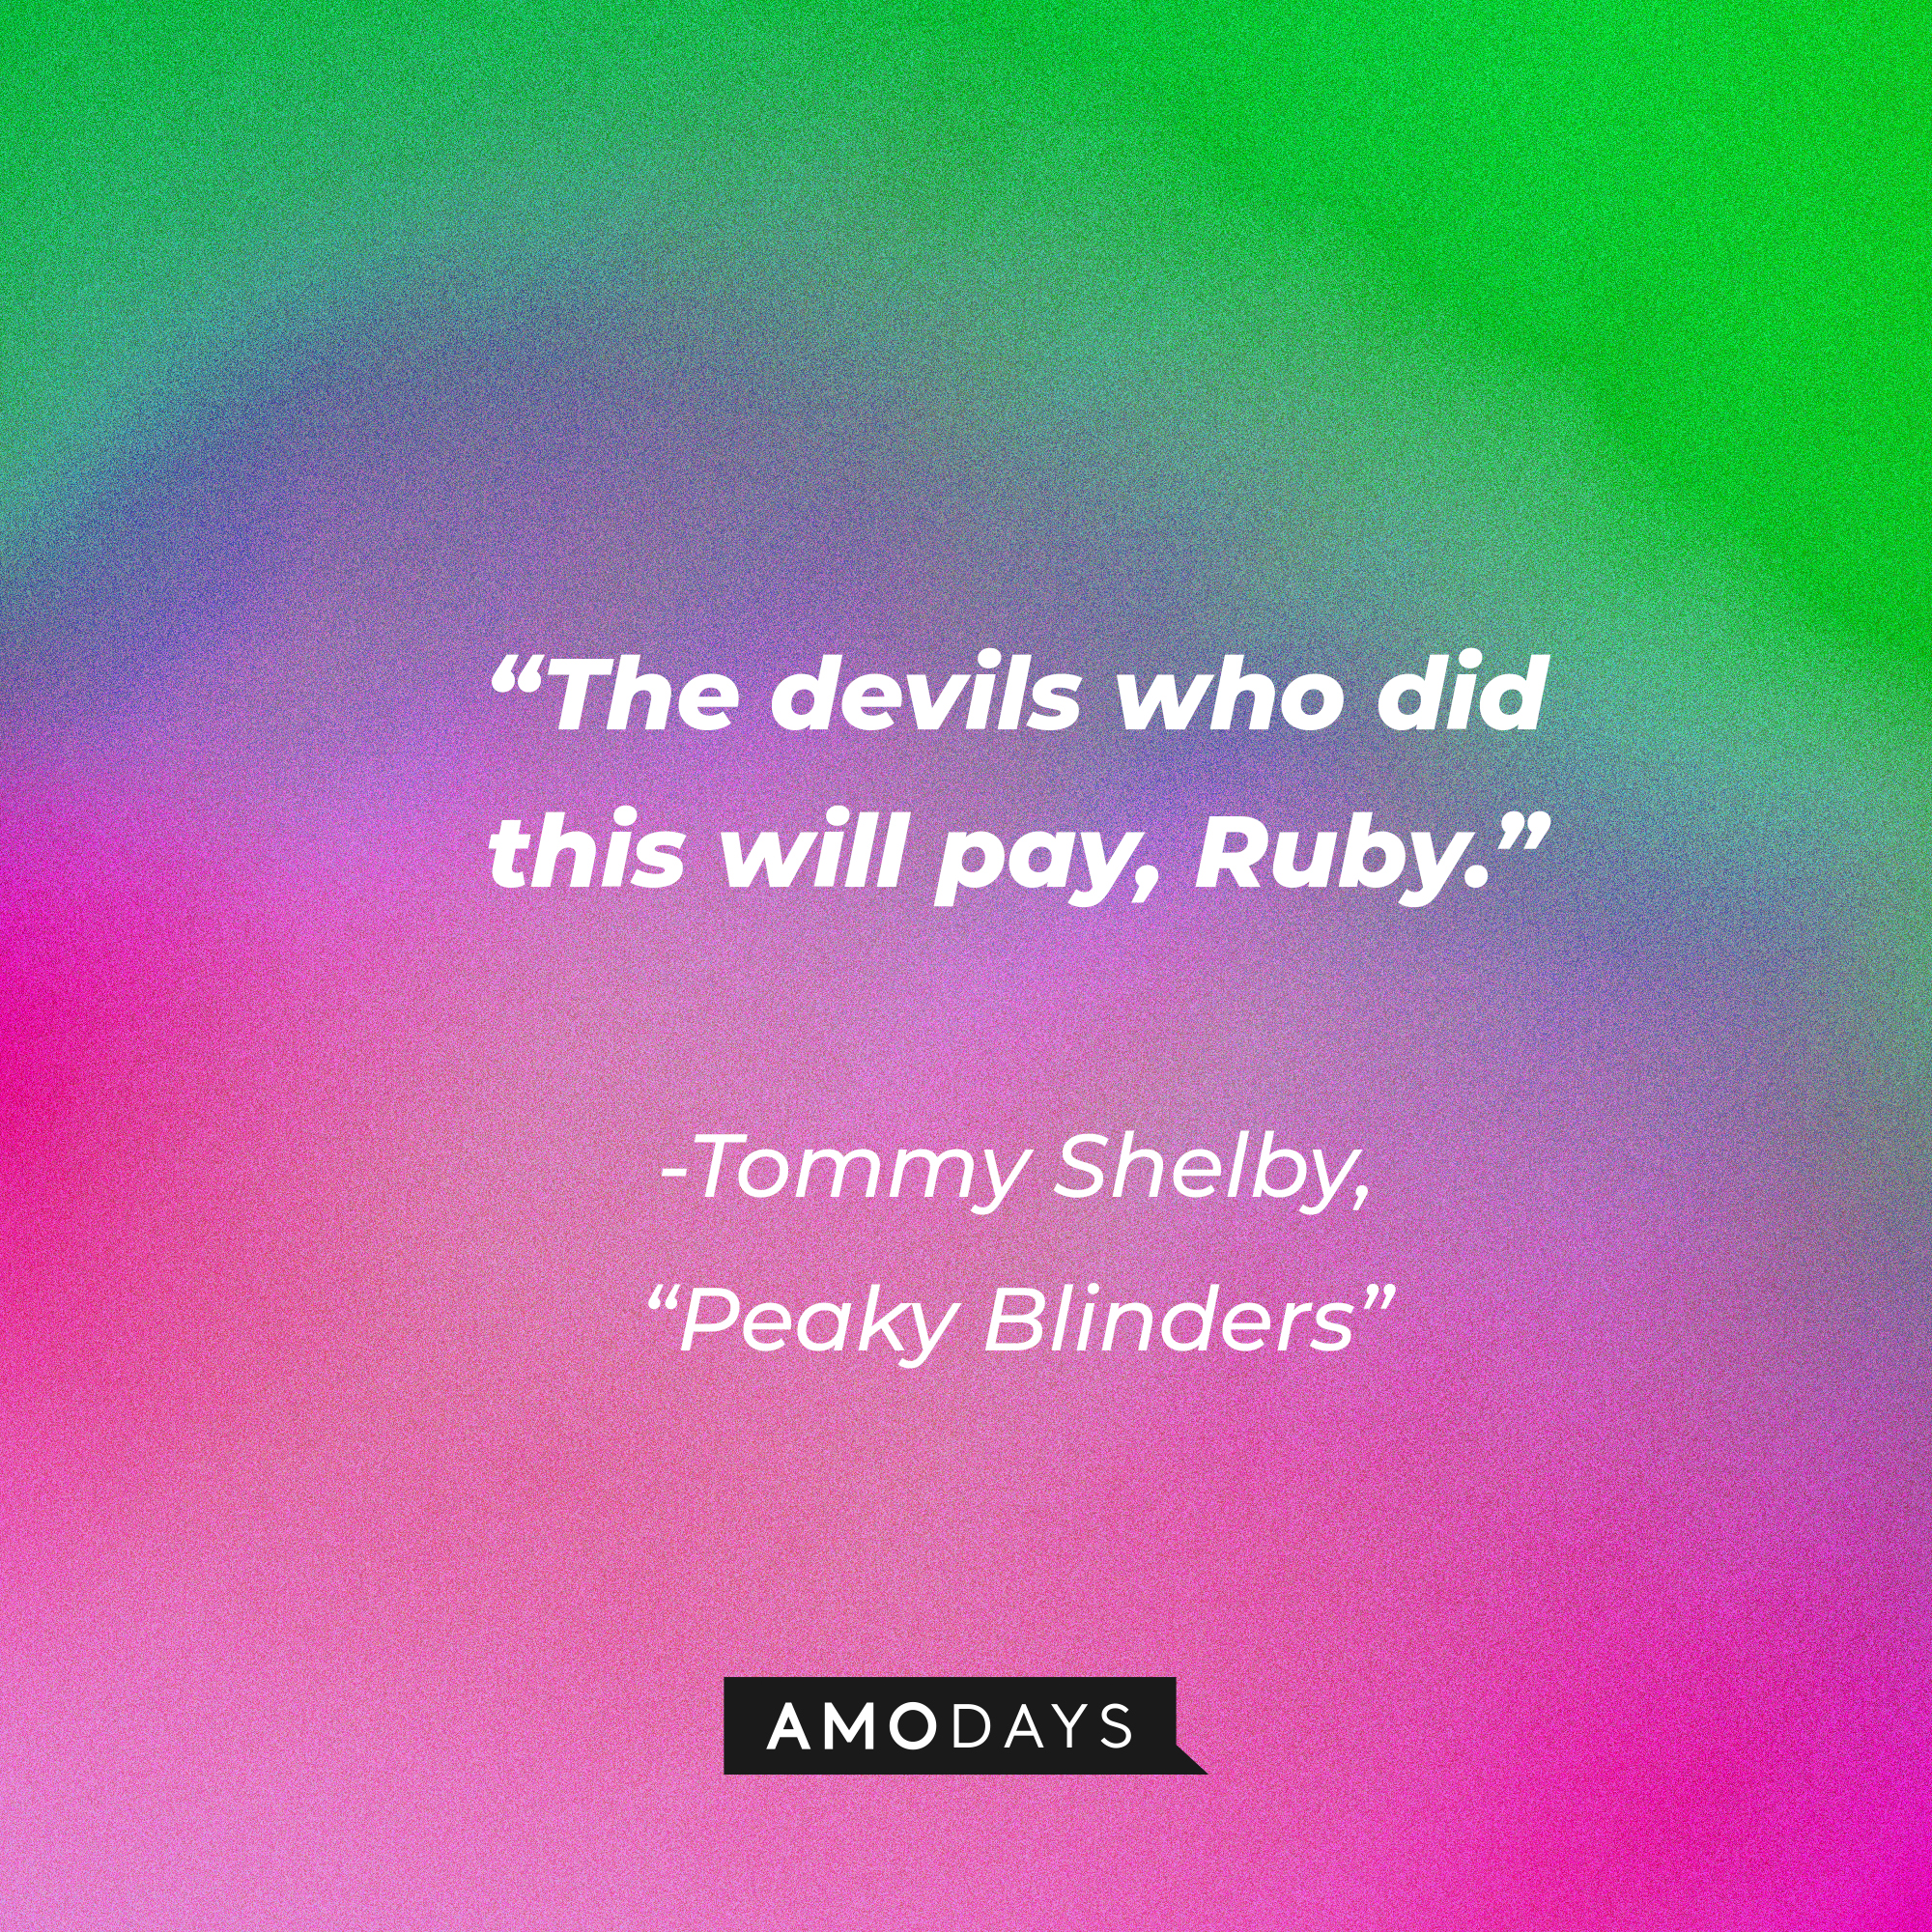 Tommy Shelby's his quote in "Peaky Blinders:" "The devils who did this will pay, Ruby." | Source: Facebook.com/PeakyBlinders